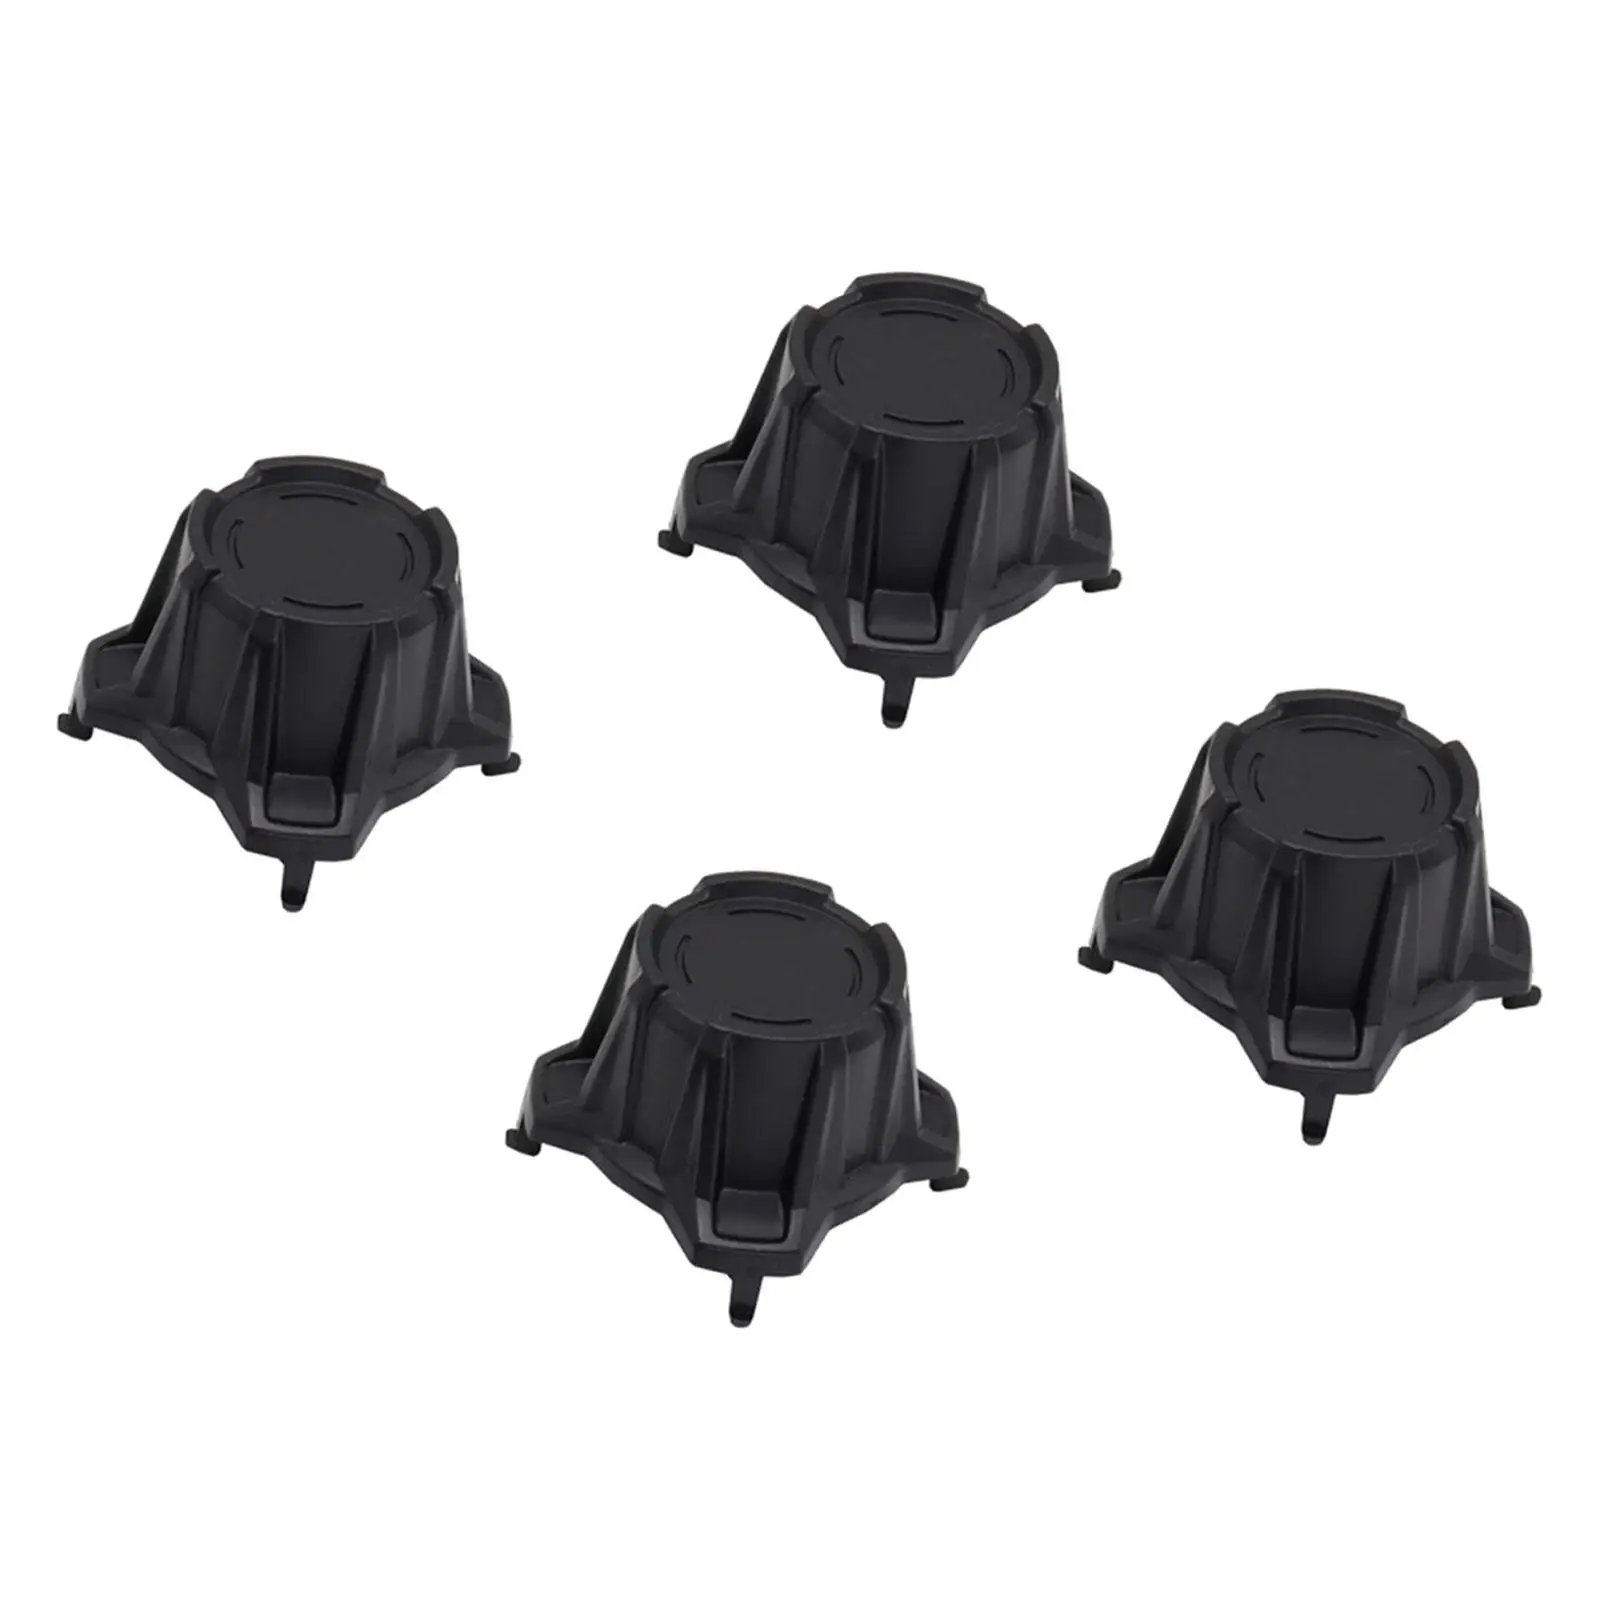 4x Wheel Center Hub Caps Motorcycle Modification for x3 2017-2020 Direct Replacement Stable Performance Repairing Accessory